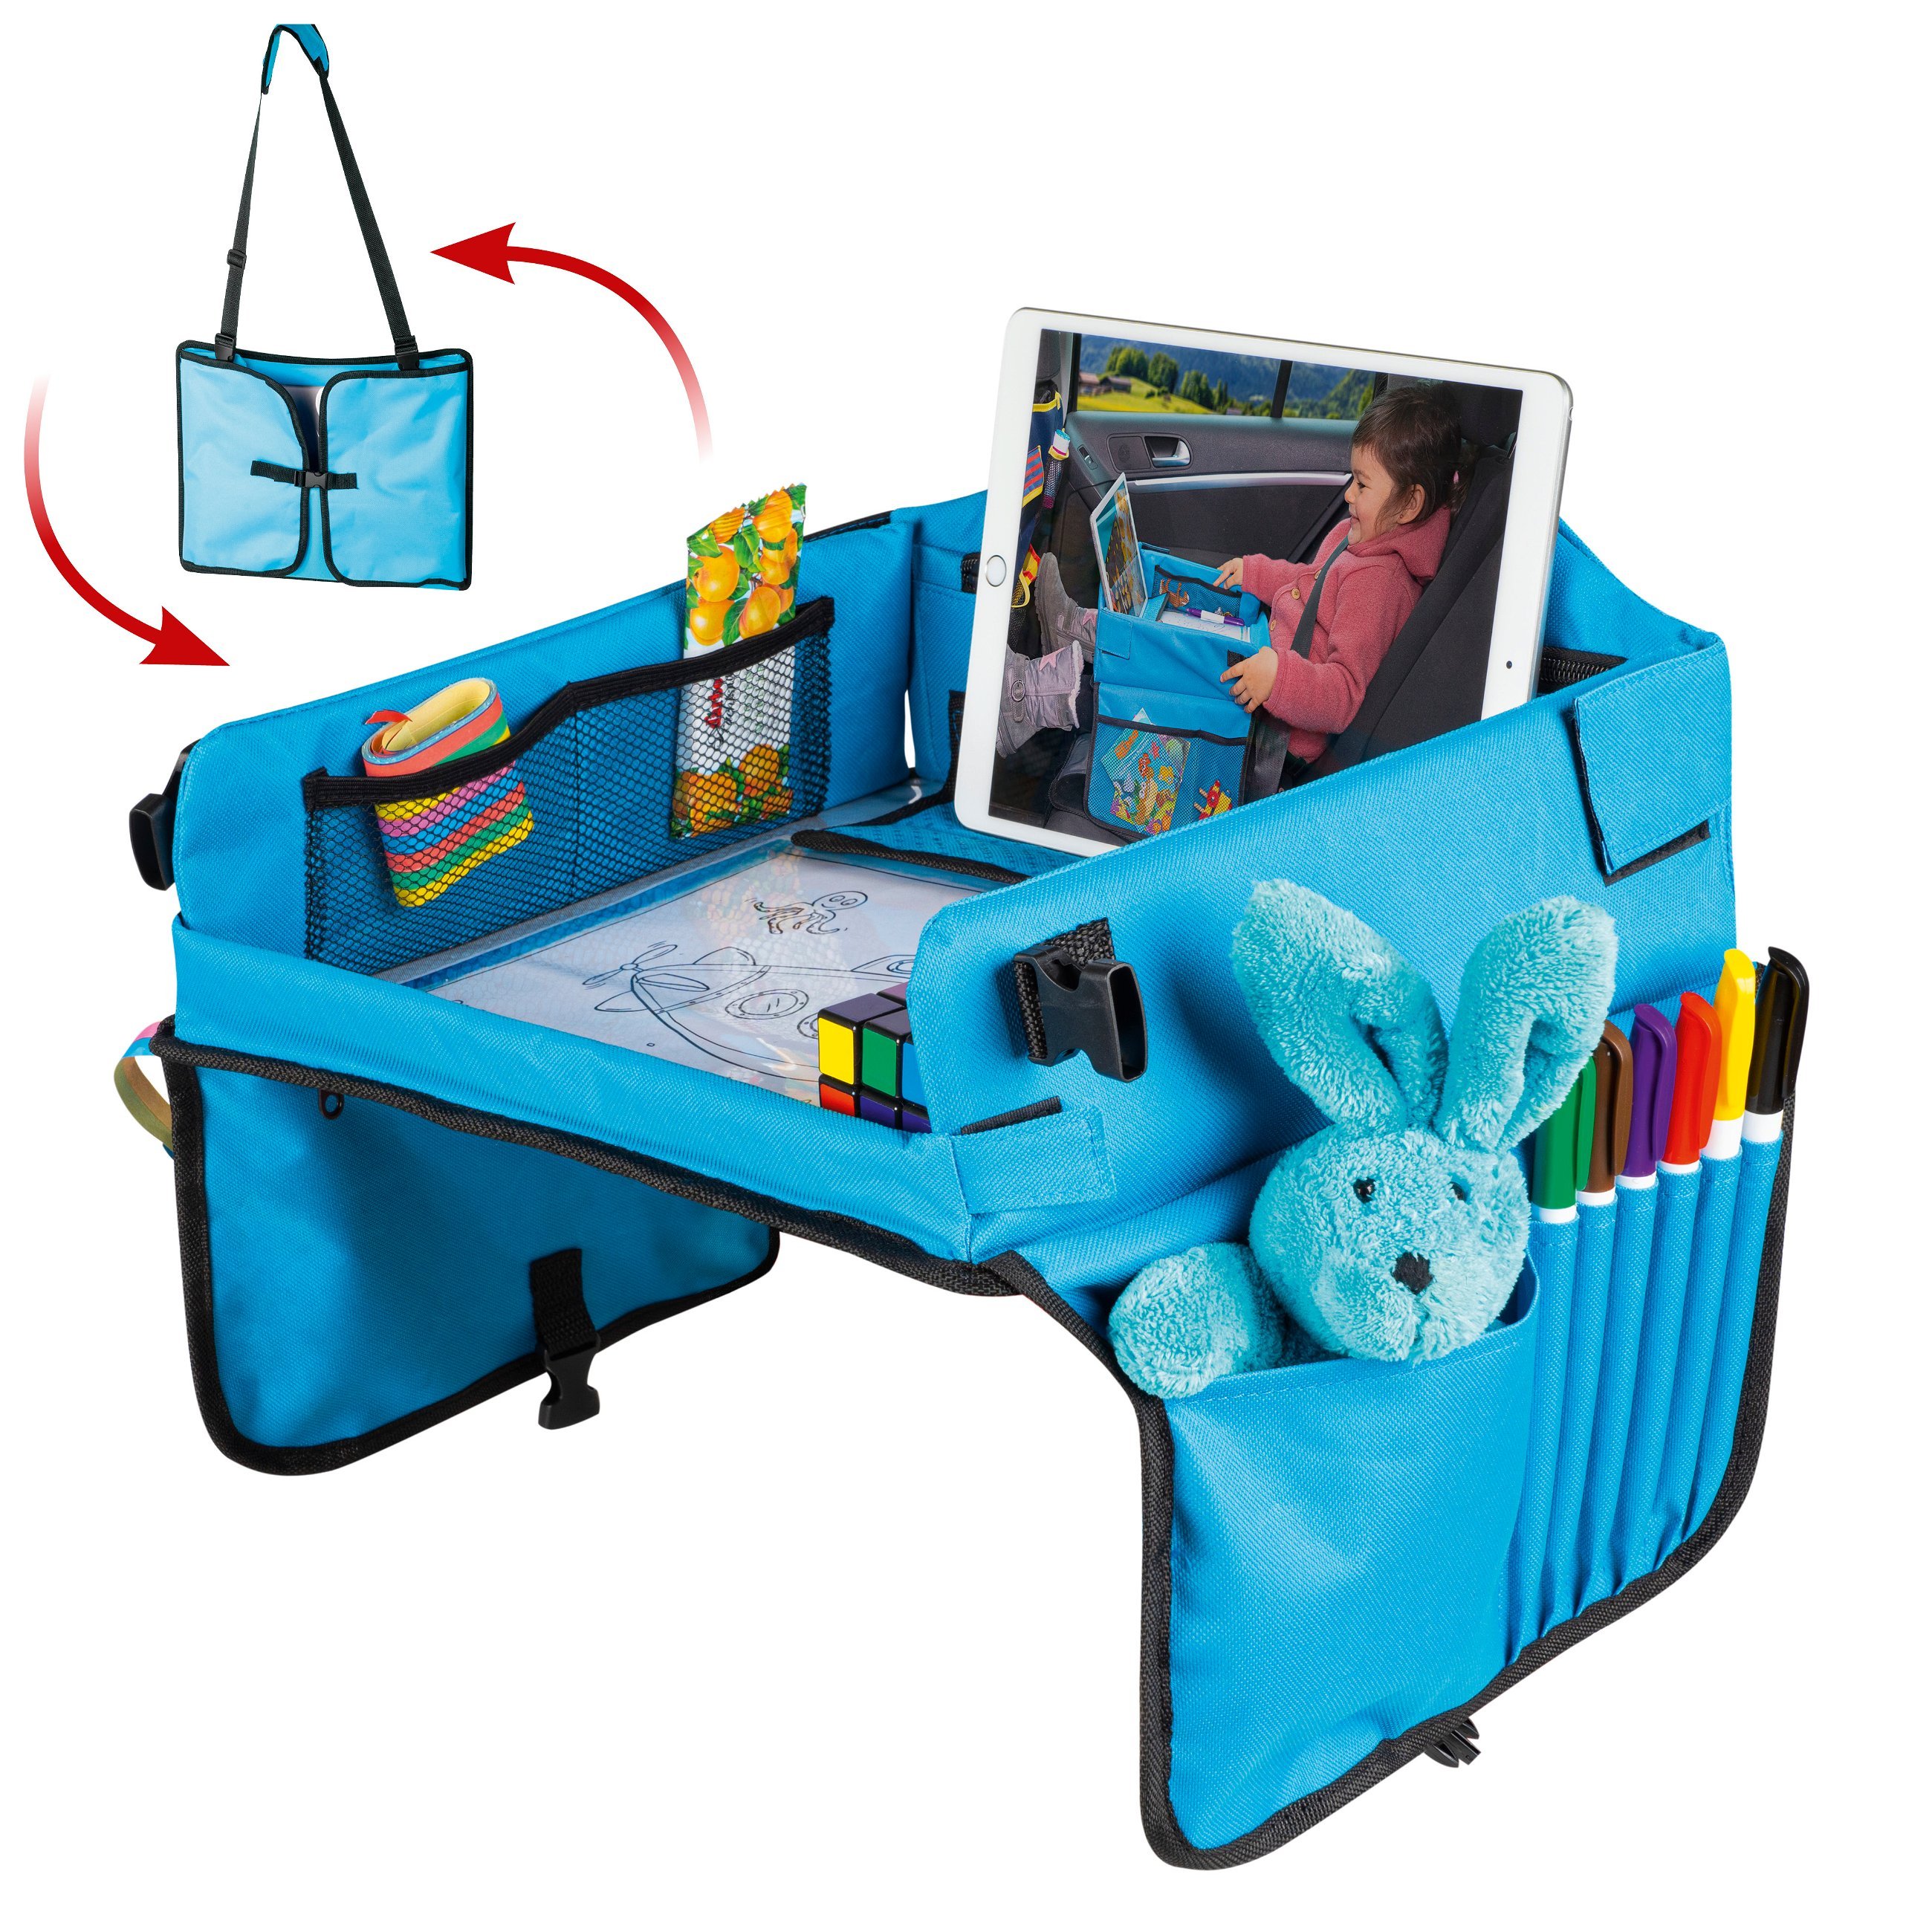 Children's travel play table for the car with tablet holder blue